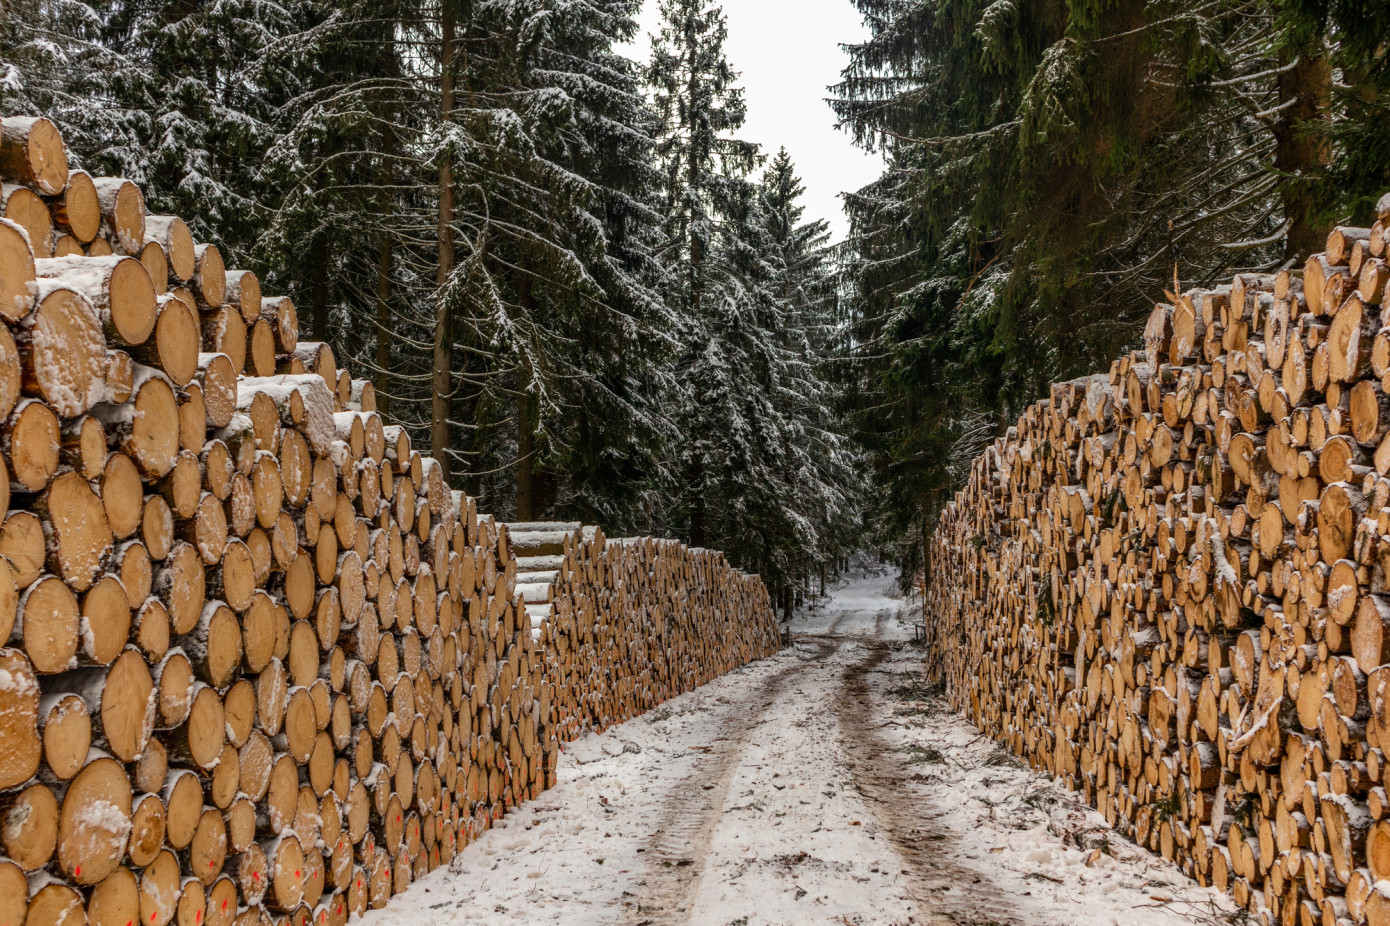 Sweden"s notified area for felling decreased by 25% in February